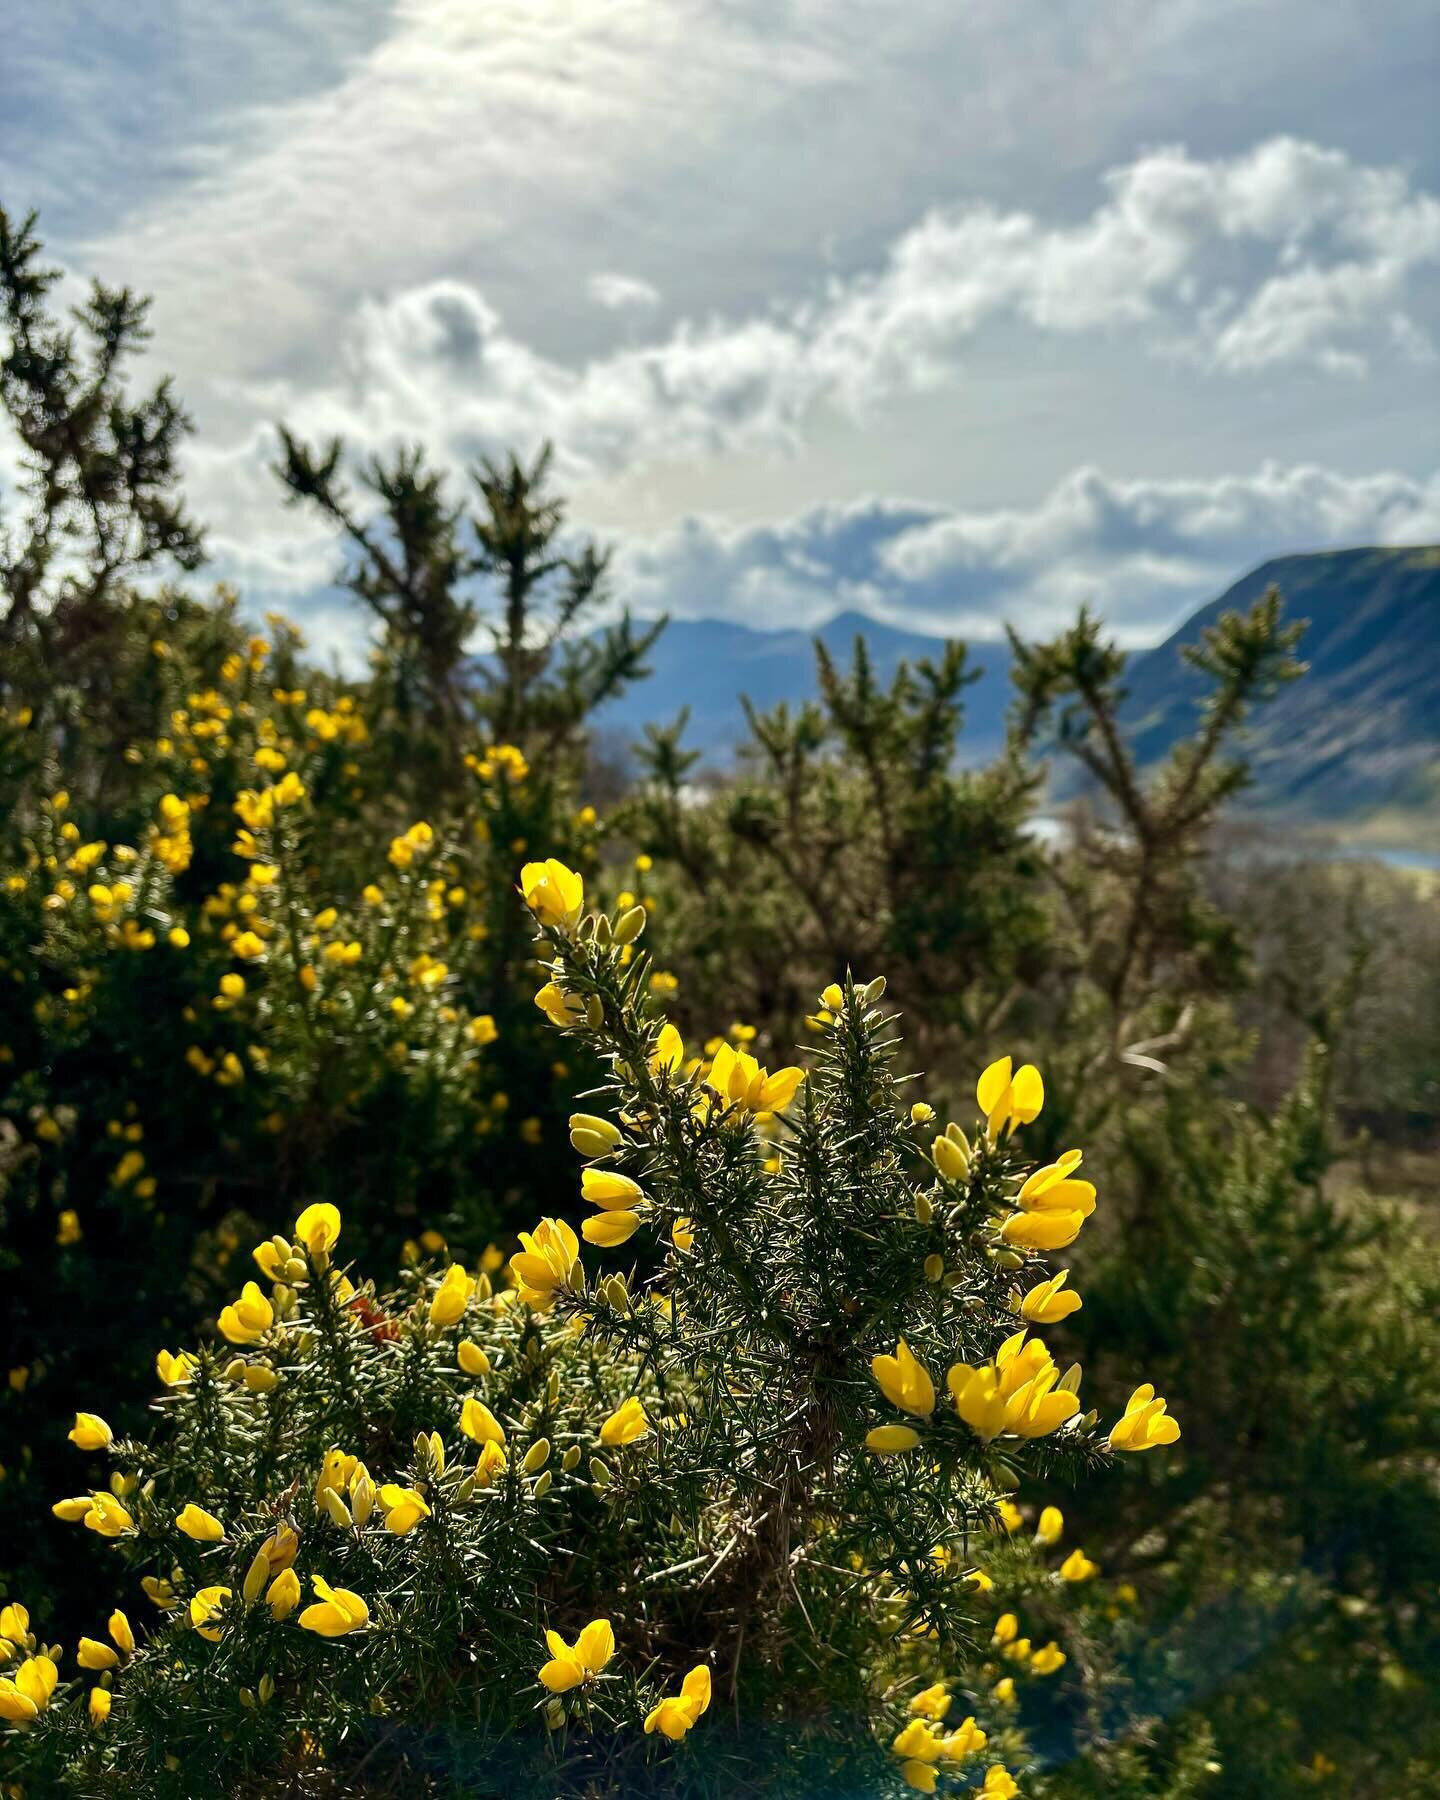 💛GLORIOUS GORSE💛
A beautiful sunny Saturday was had, made all the more yellow with Crummock Water Gorse flowering and spreading its utterly butterly joy! 

💛Gorse is an extraordinary plant, flowering a little in late autumn and through the winter 